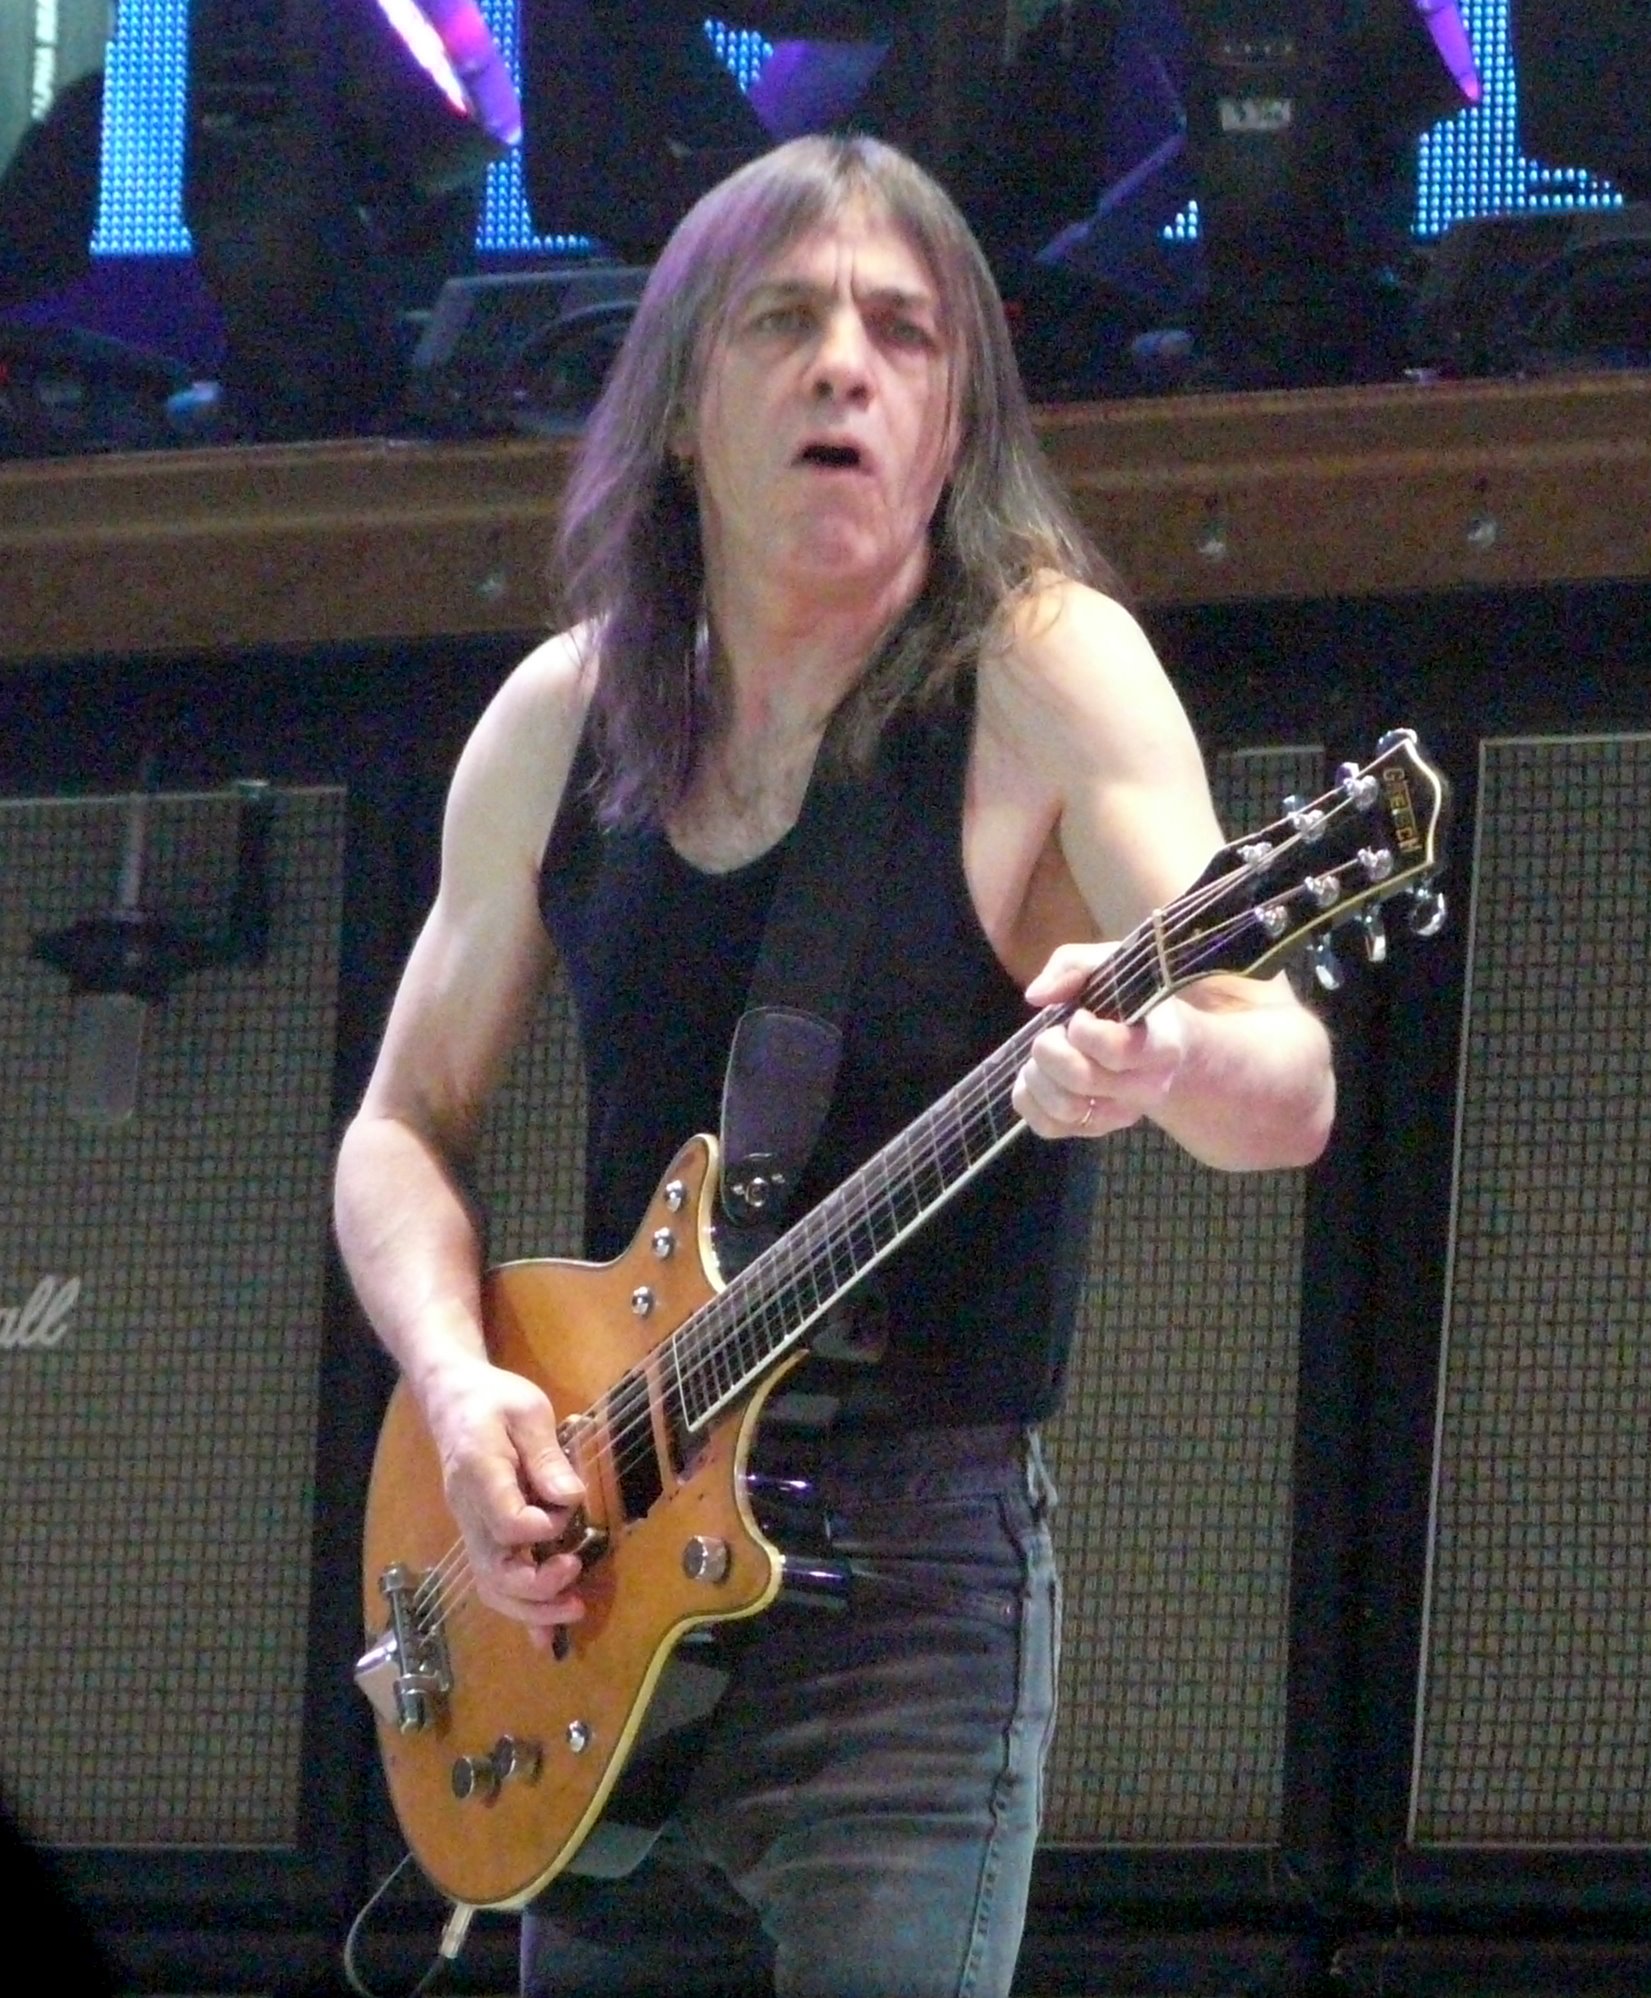 Malcolm Young is taking a break from the band due to ill health